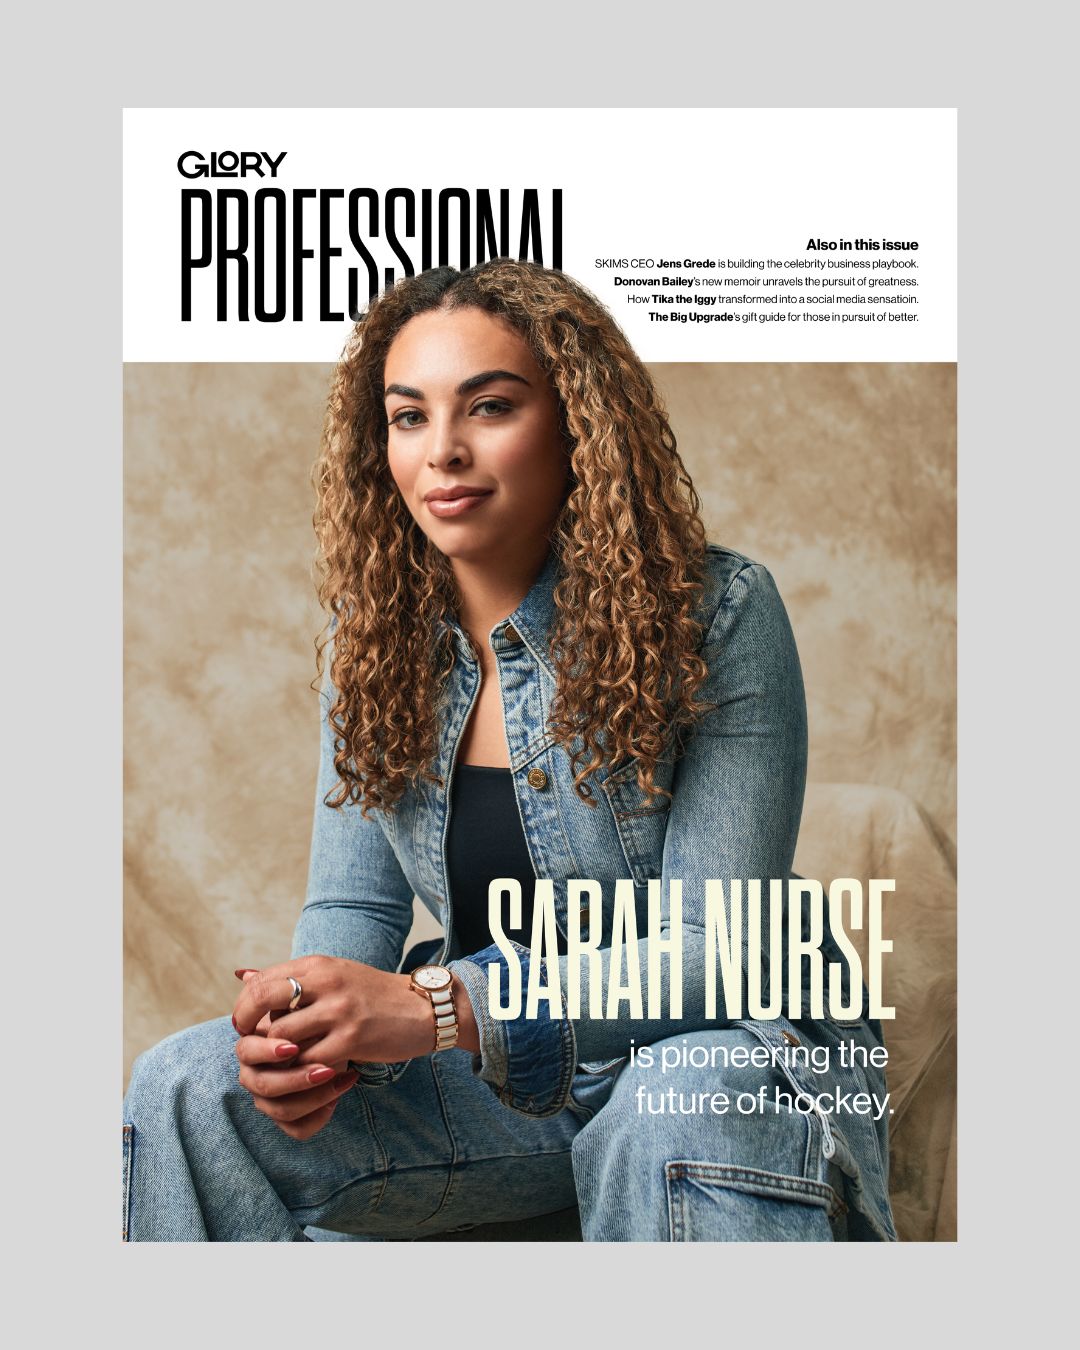 Glory Professional magazine cover featuring Sarah Nurse wearing a denim jacket and pants. She is seated with her elbows on her knees against a brown background.